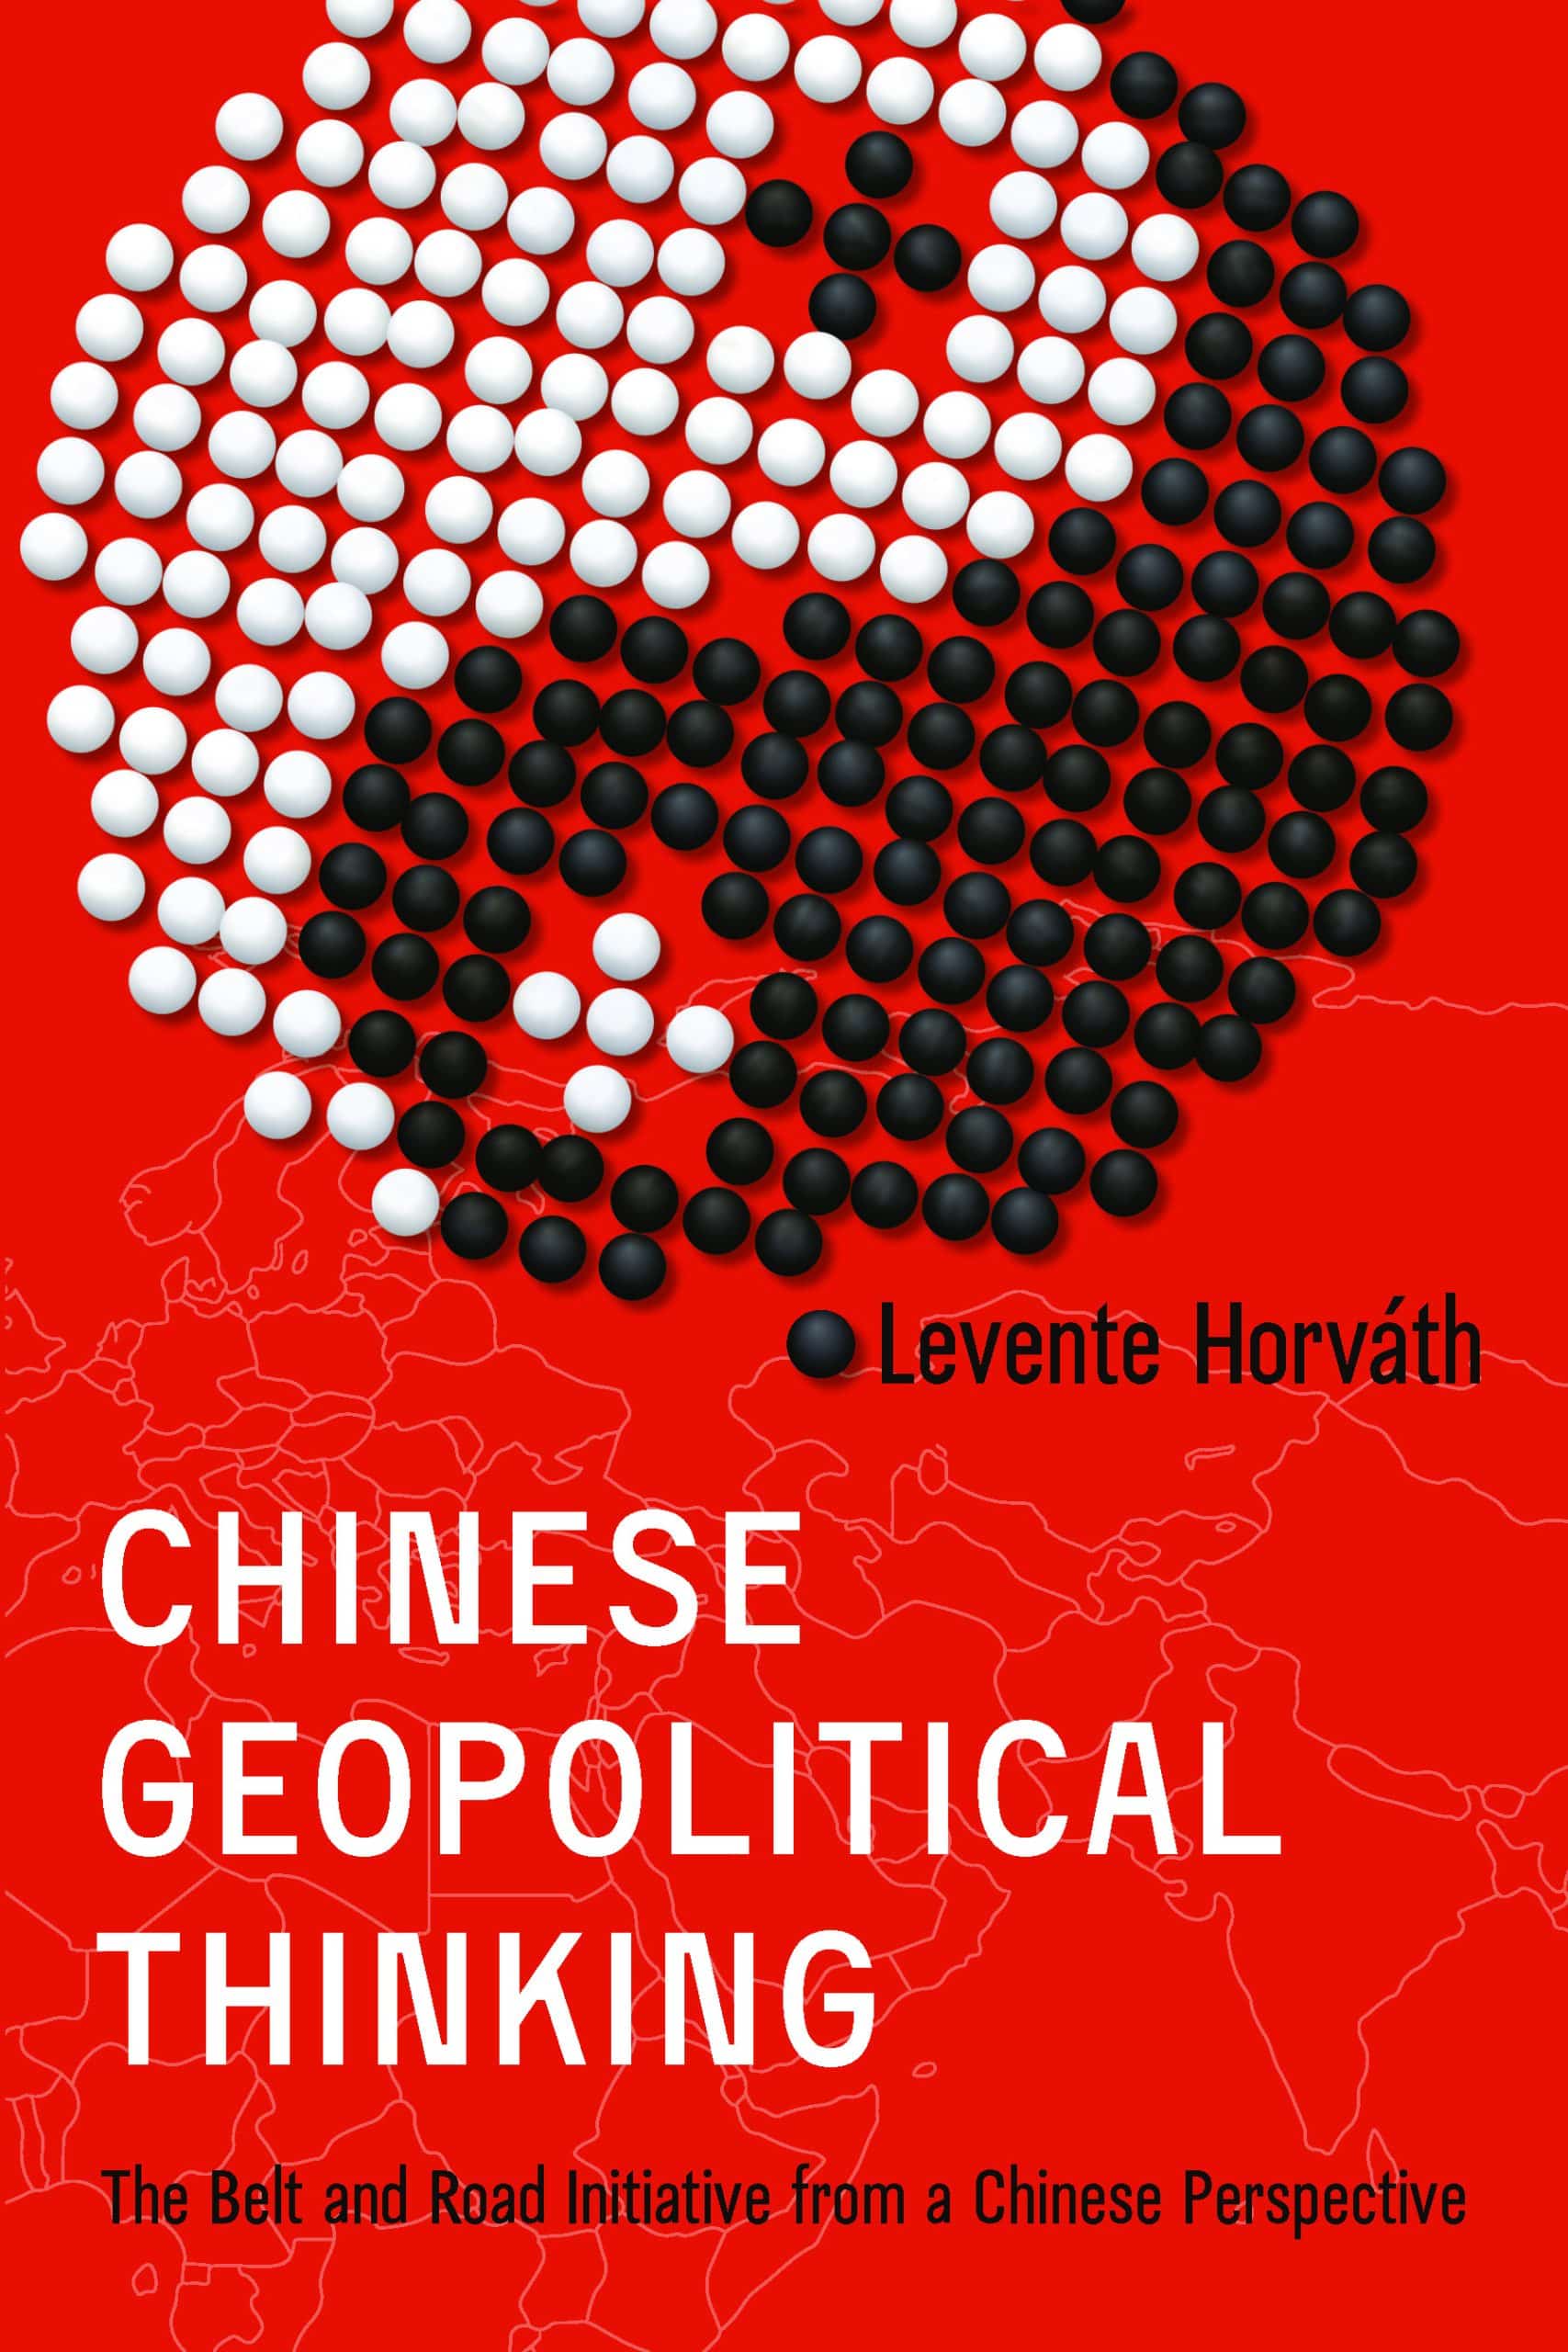 Levente Horváth: Chinese geopolitical thinking